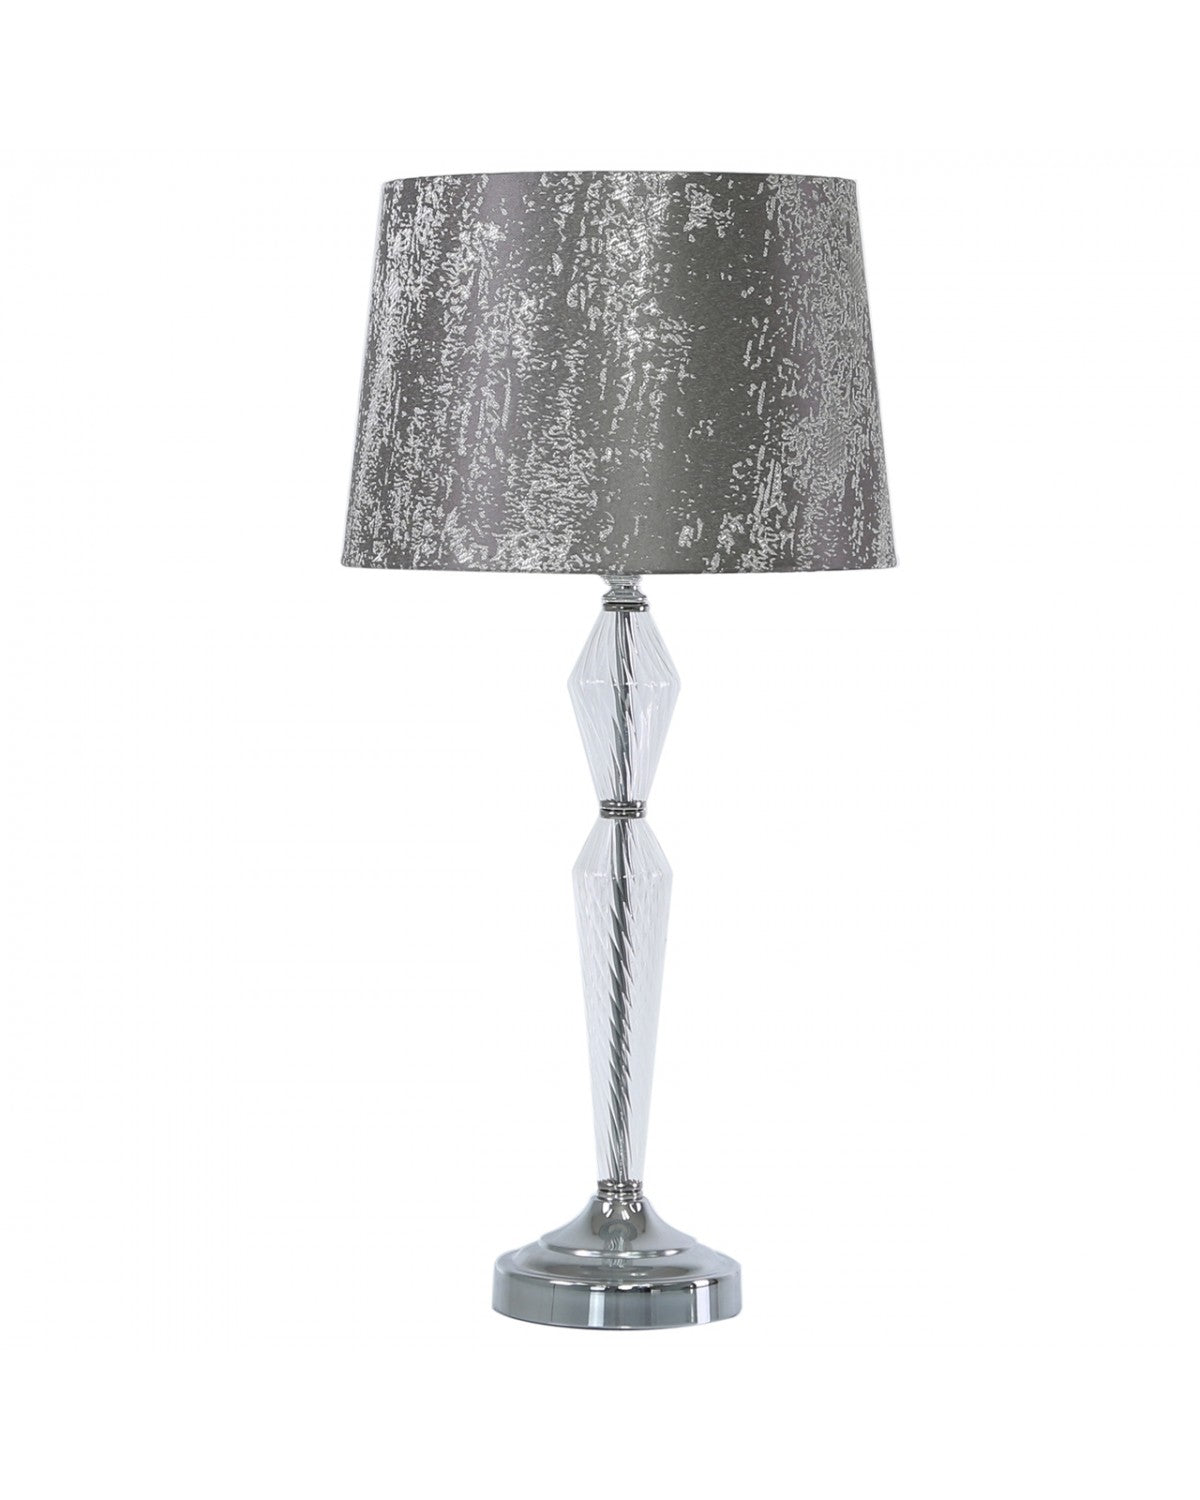 Deco Home 58cm Metal And Glass Table Lamp With Taupe Cotton Shade